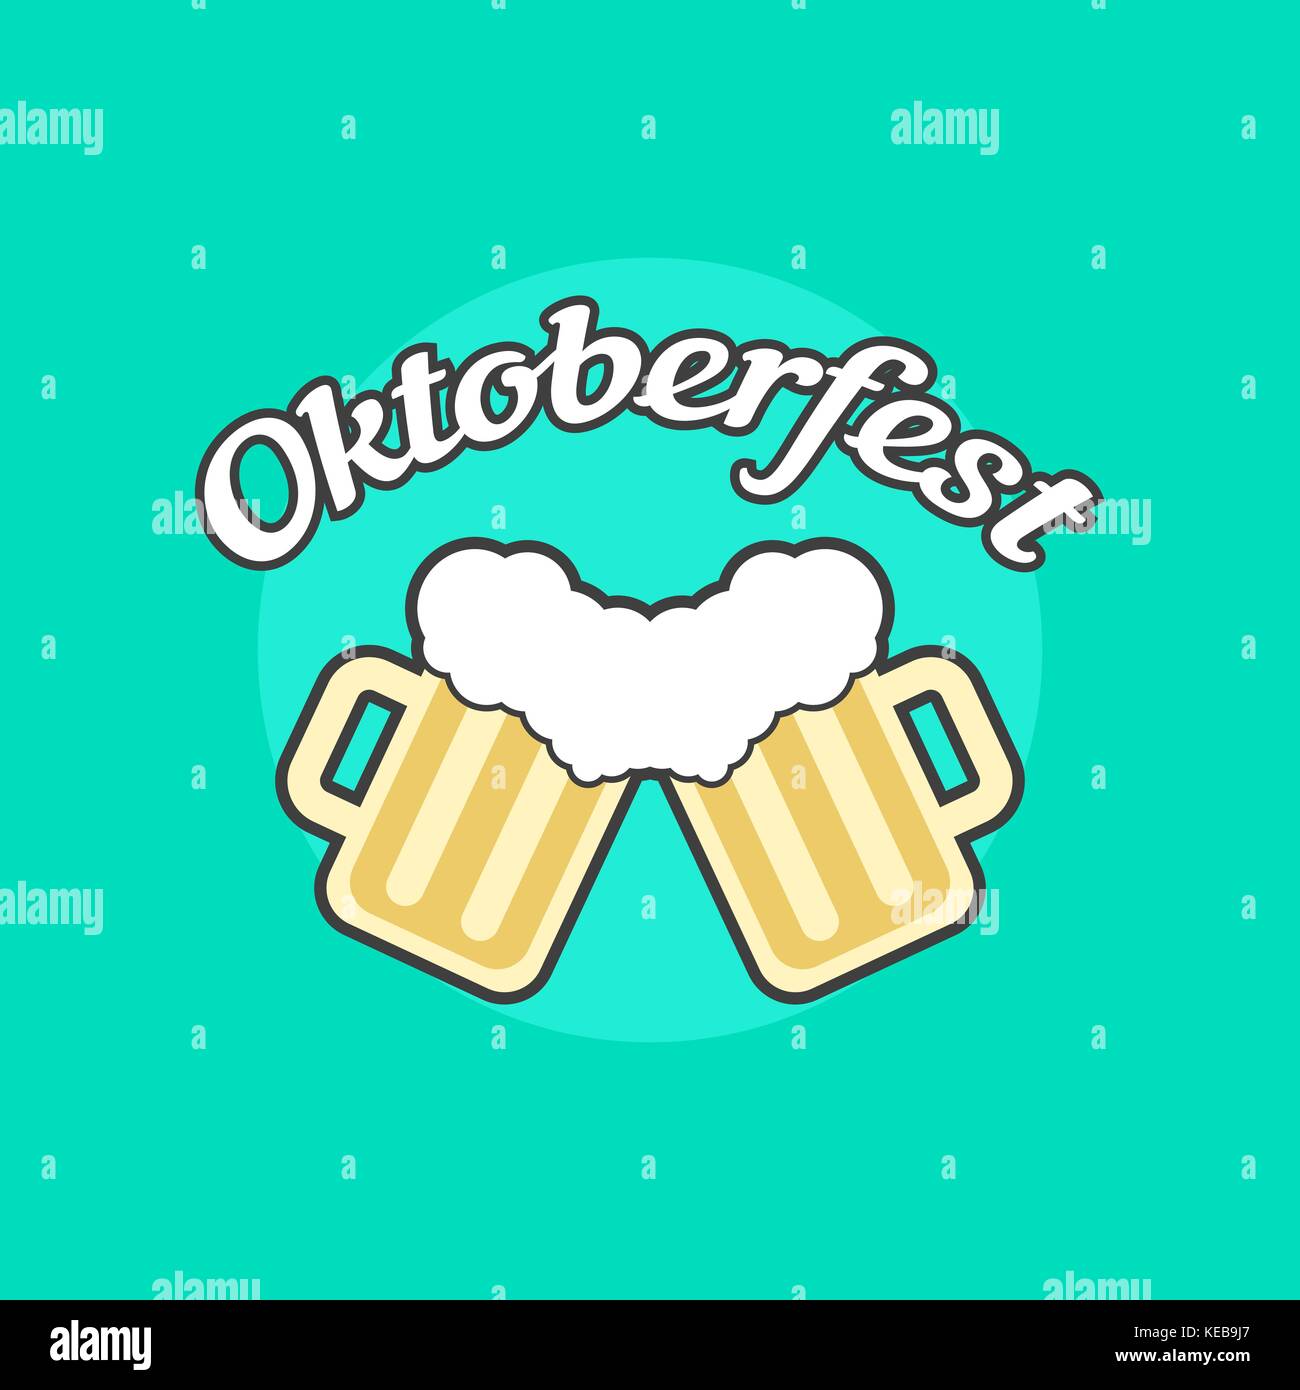 oktoberfest icon with toby jugs Stock Vector